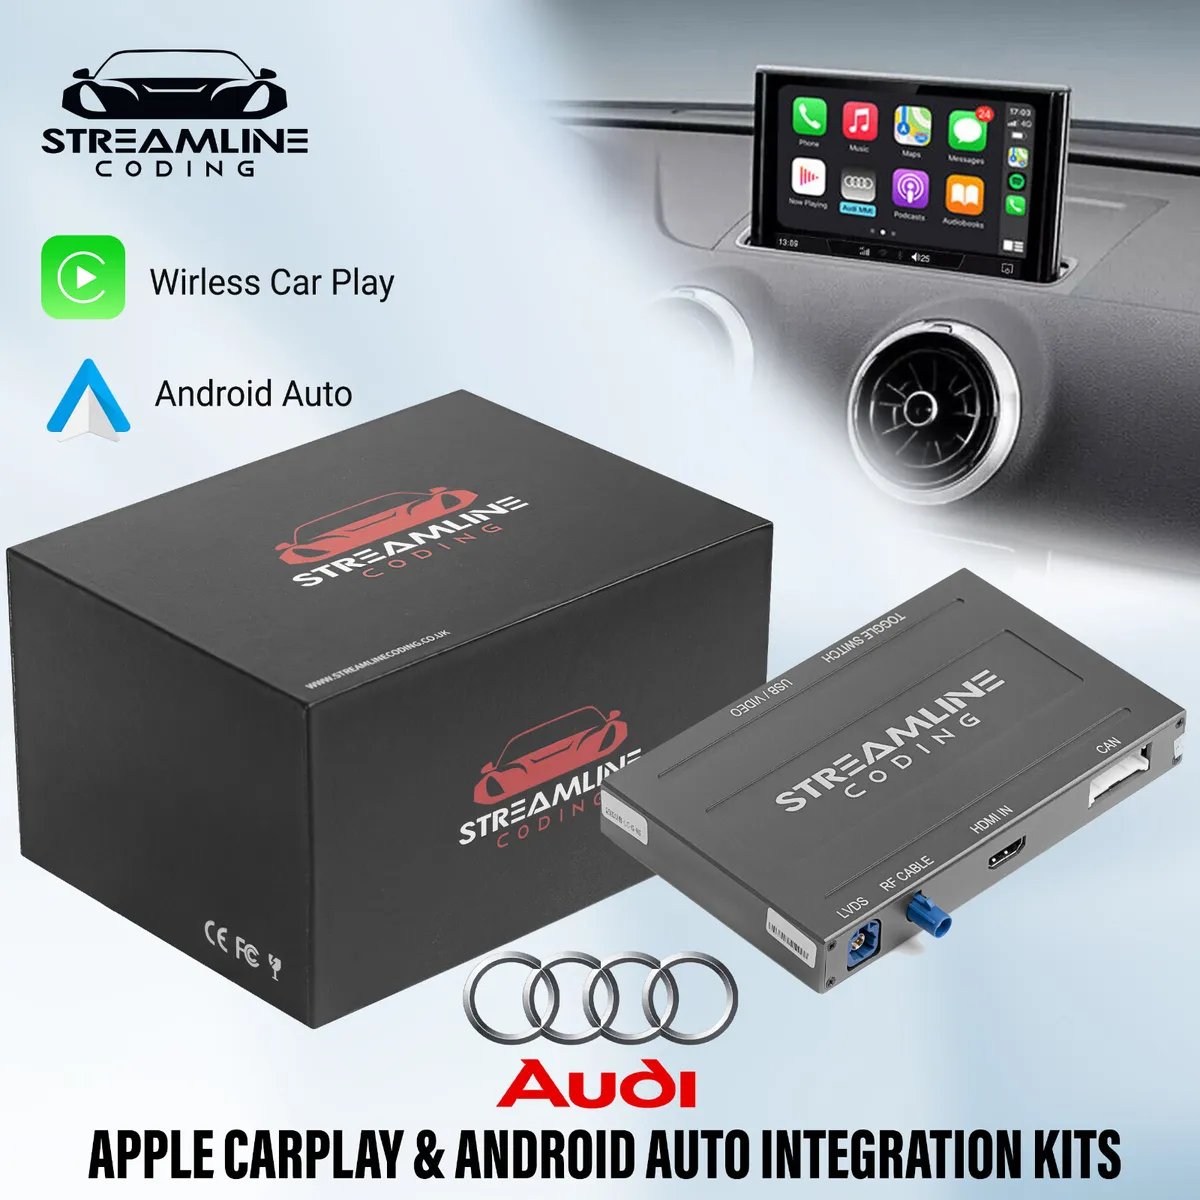 Audi A3 S3 RS3 Wireless Apple CarPlay & Android Auto Integration